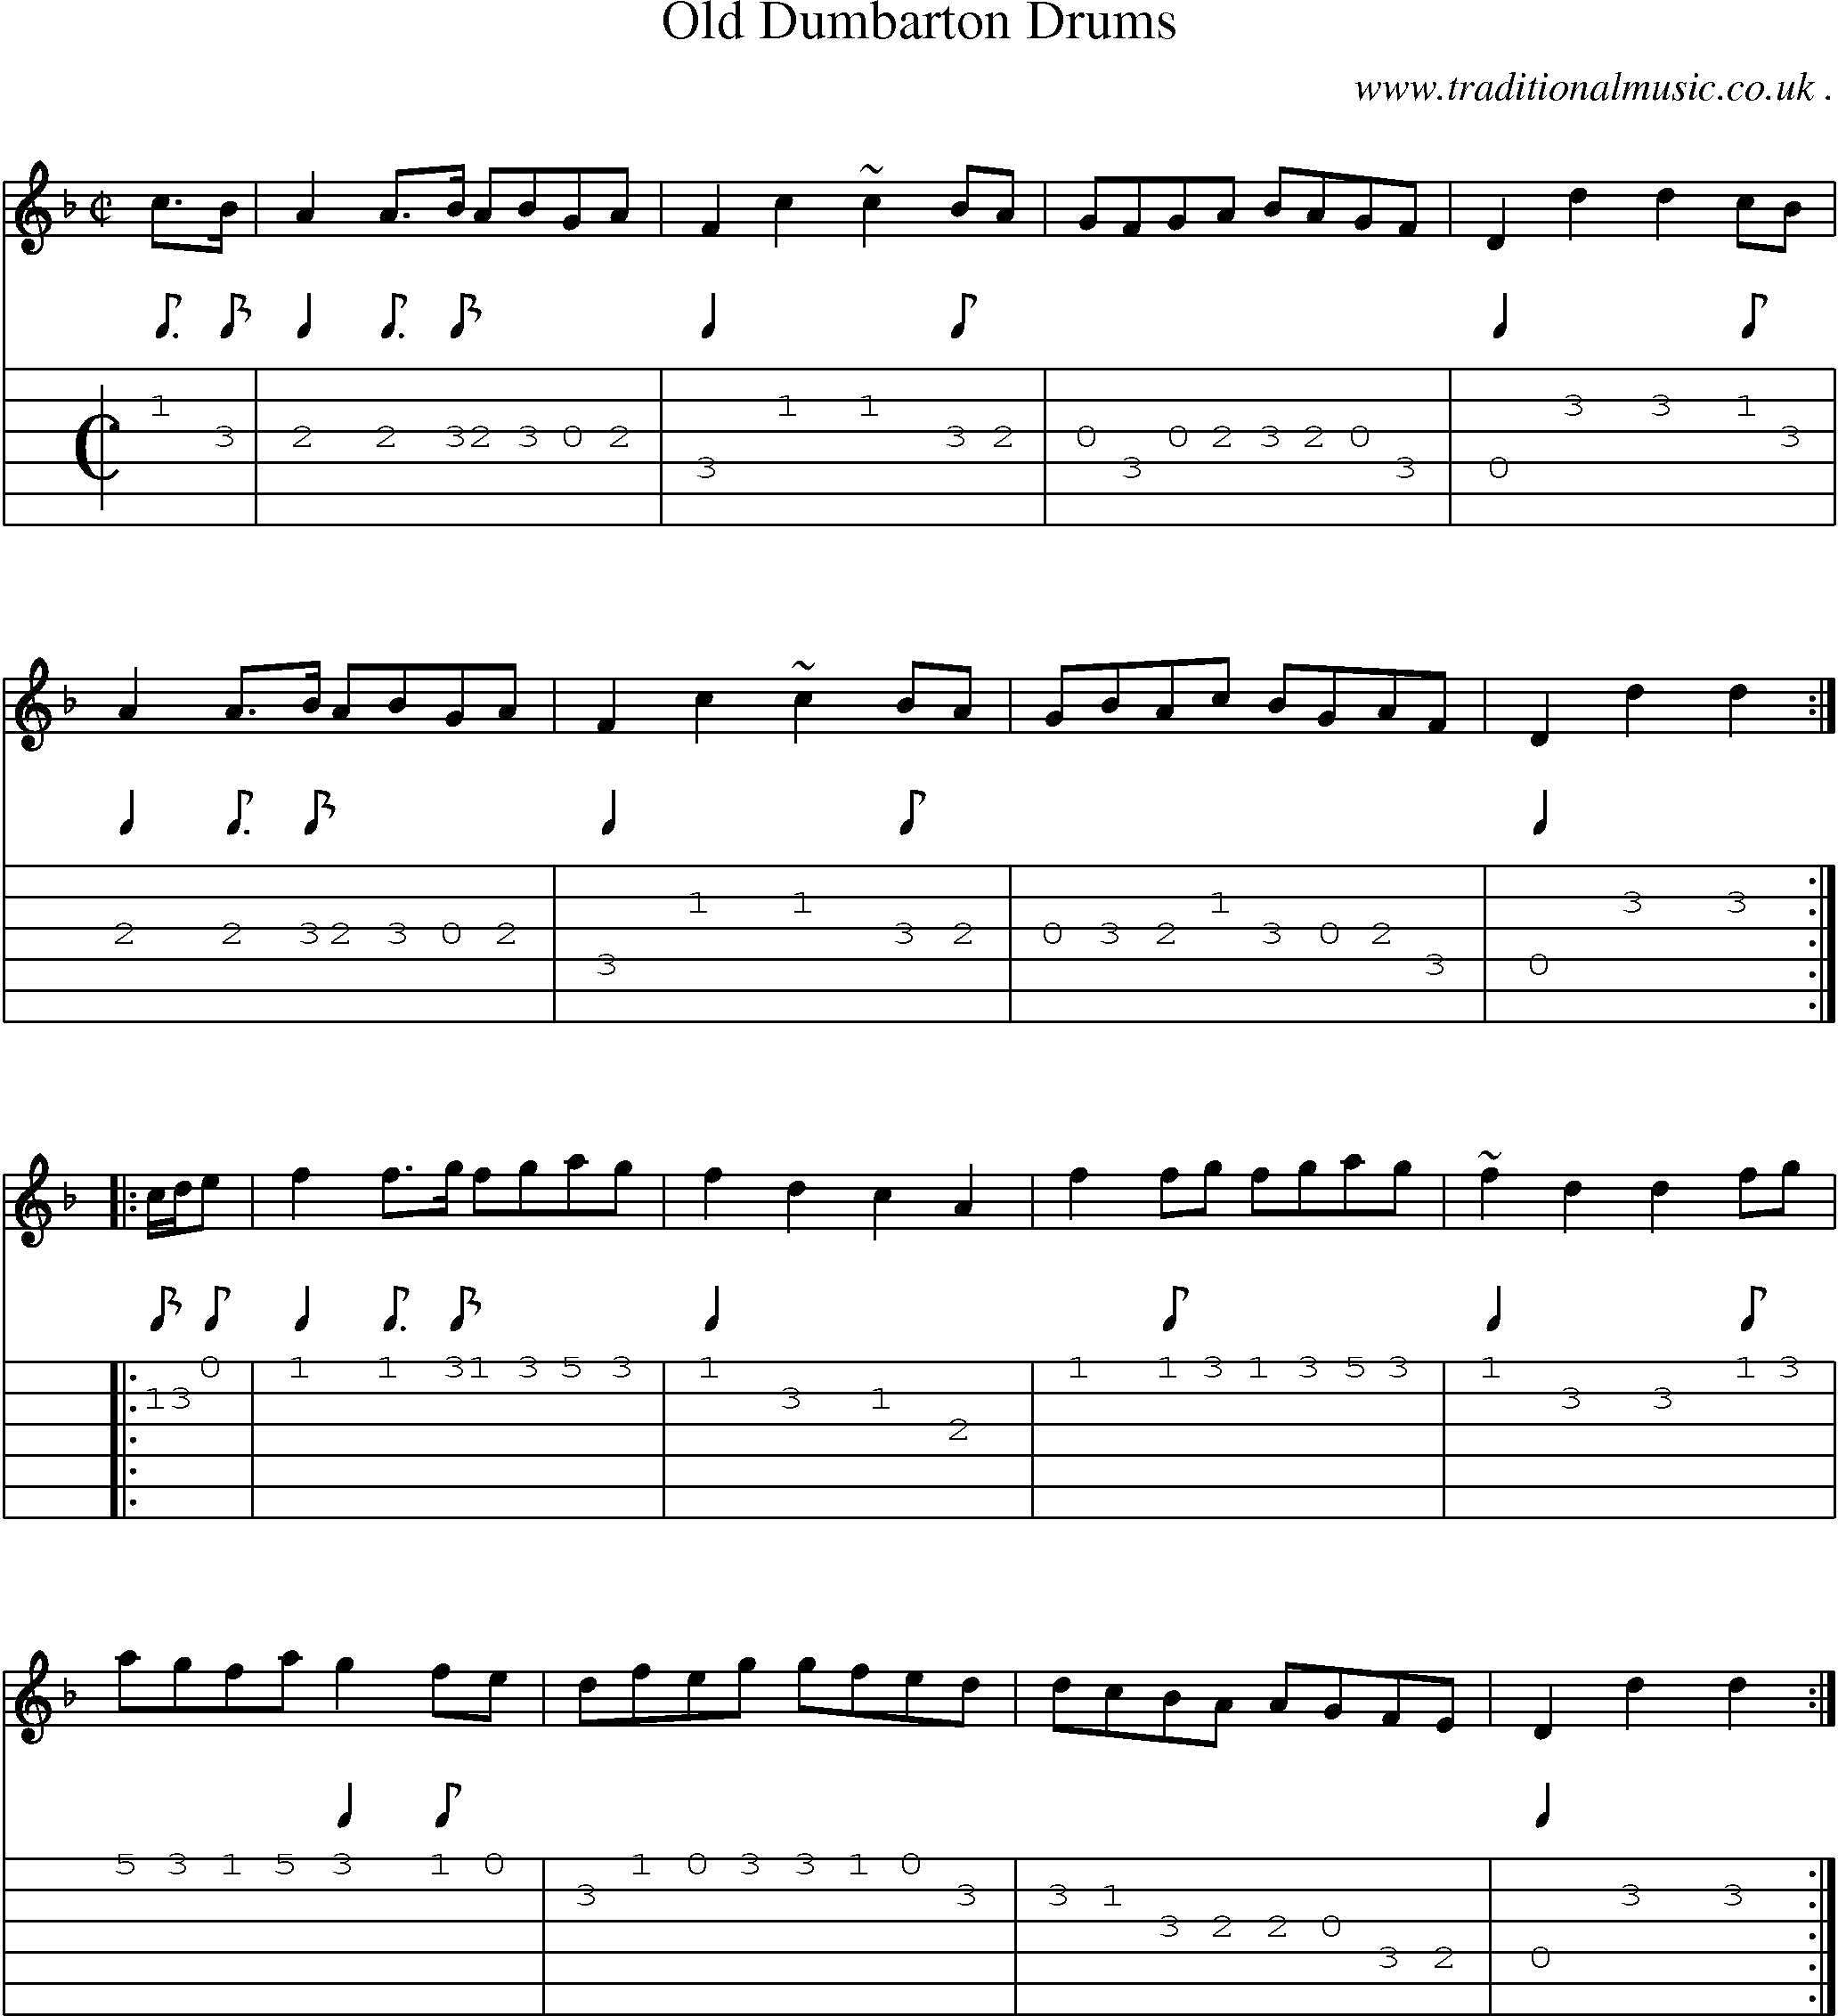 Sheet-music  score, Chords and Guitar Tabs for Old Dumbarton Drums